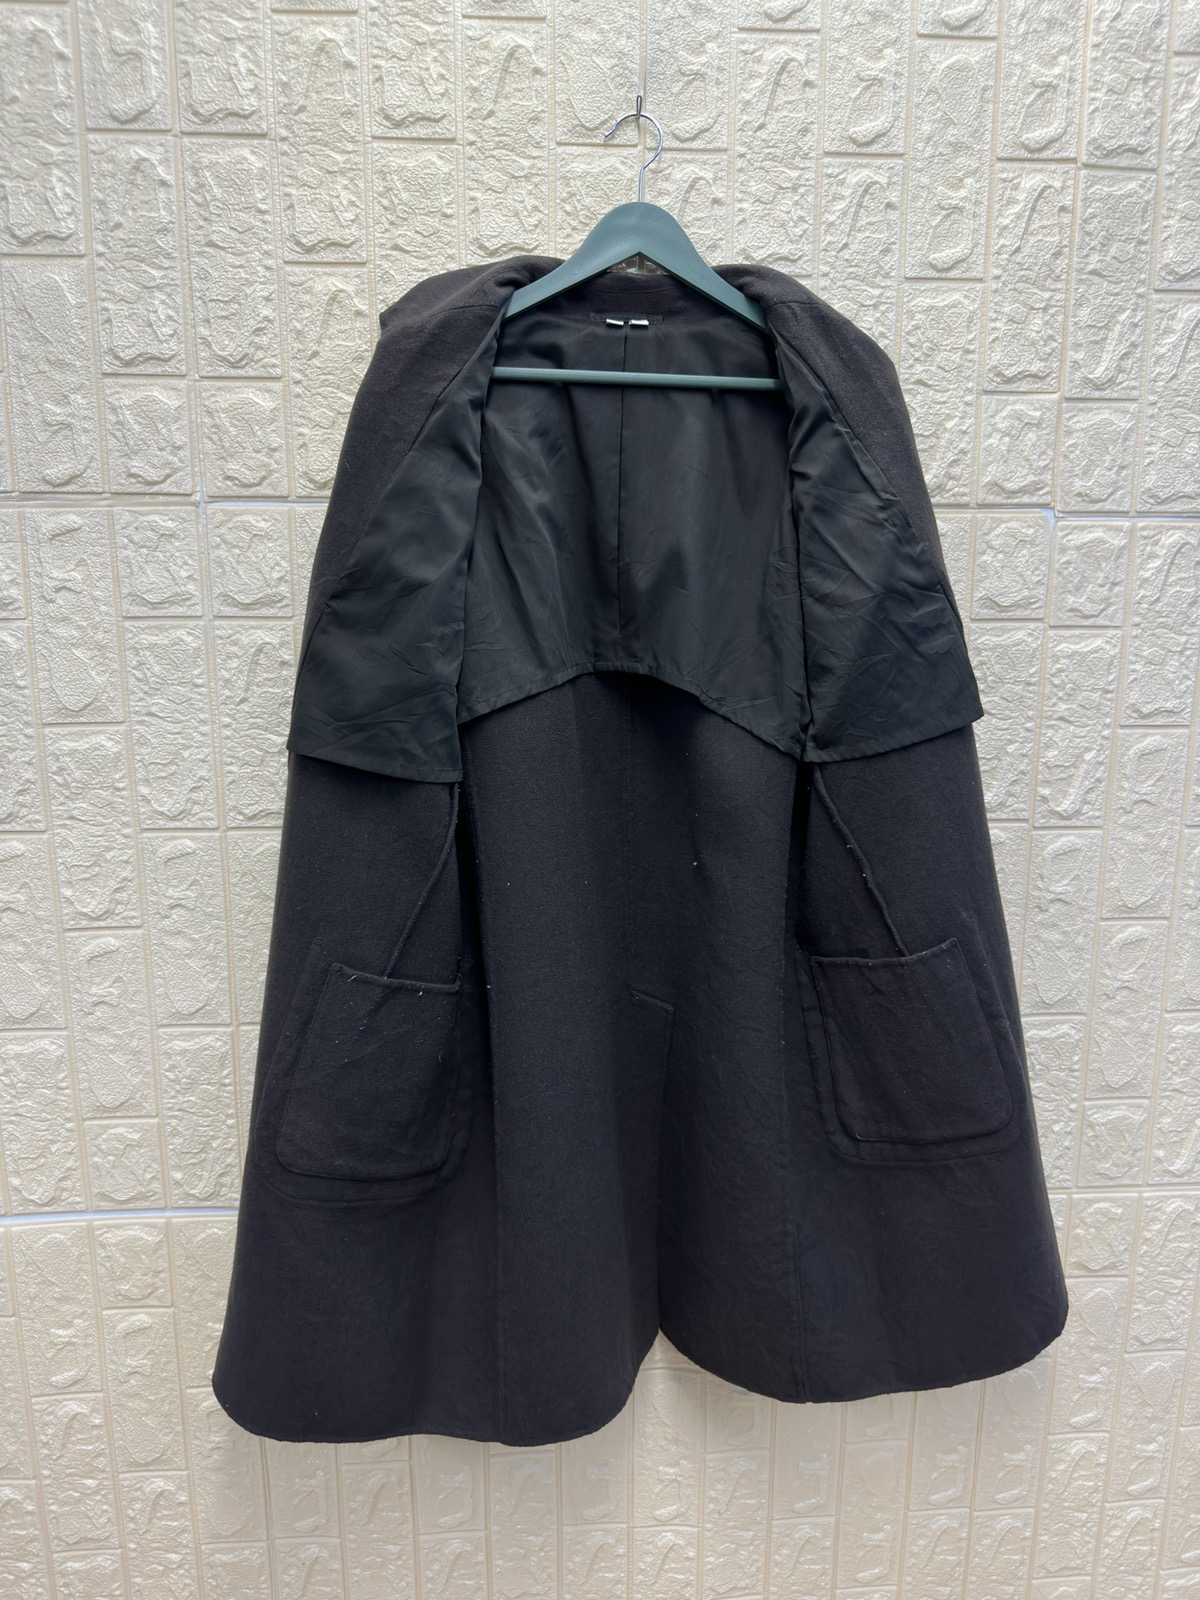 Undercover X Uniqlo Wool Trench Coat-GR97 - 6